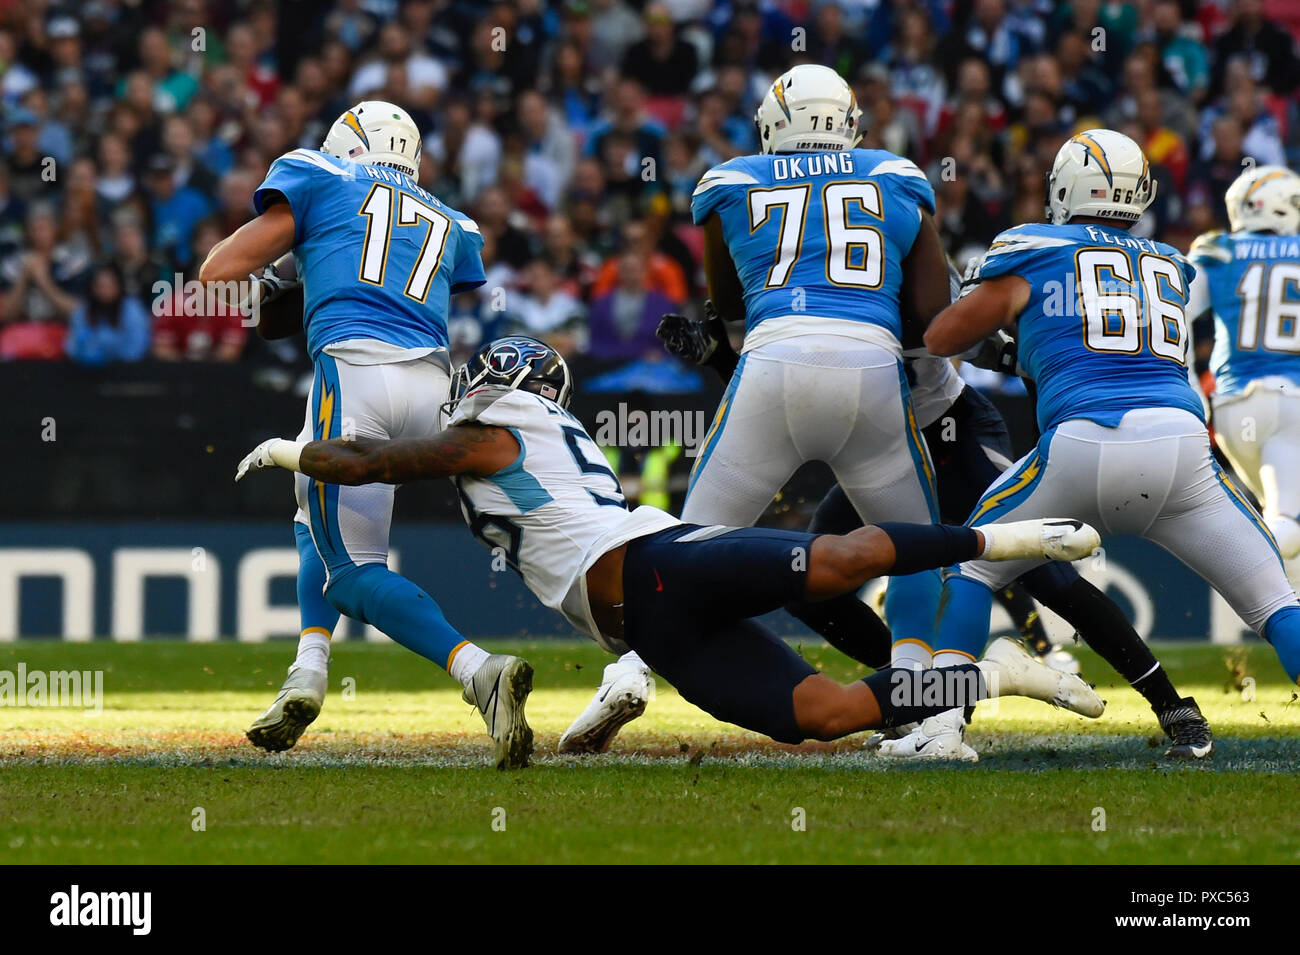 London, UK.  21 October 2018. Quarterback Philip Rivers (17) of The Chargers is tackled. Tennessee Titans at Los Angeles Chargers NFL game at Wembley Stadium, the second of the NFL London 2018 games. Final score - Chargers 20 Titans 19.  Credit: Stephen Chung / Alamy Live News Stock Photo